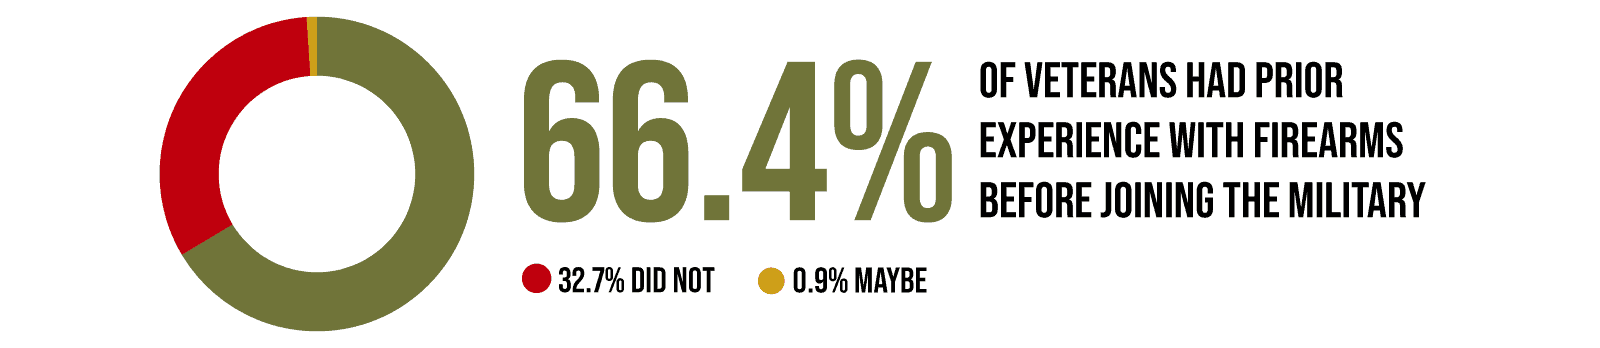 66.4% of Veterans Had Experience With Firearms Before Joining the Military